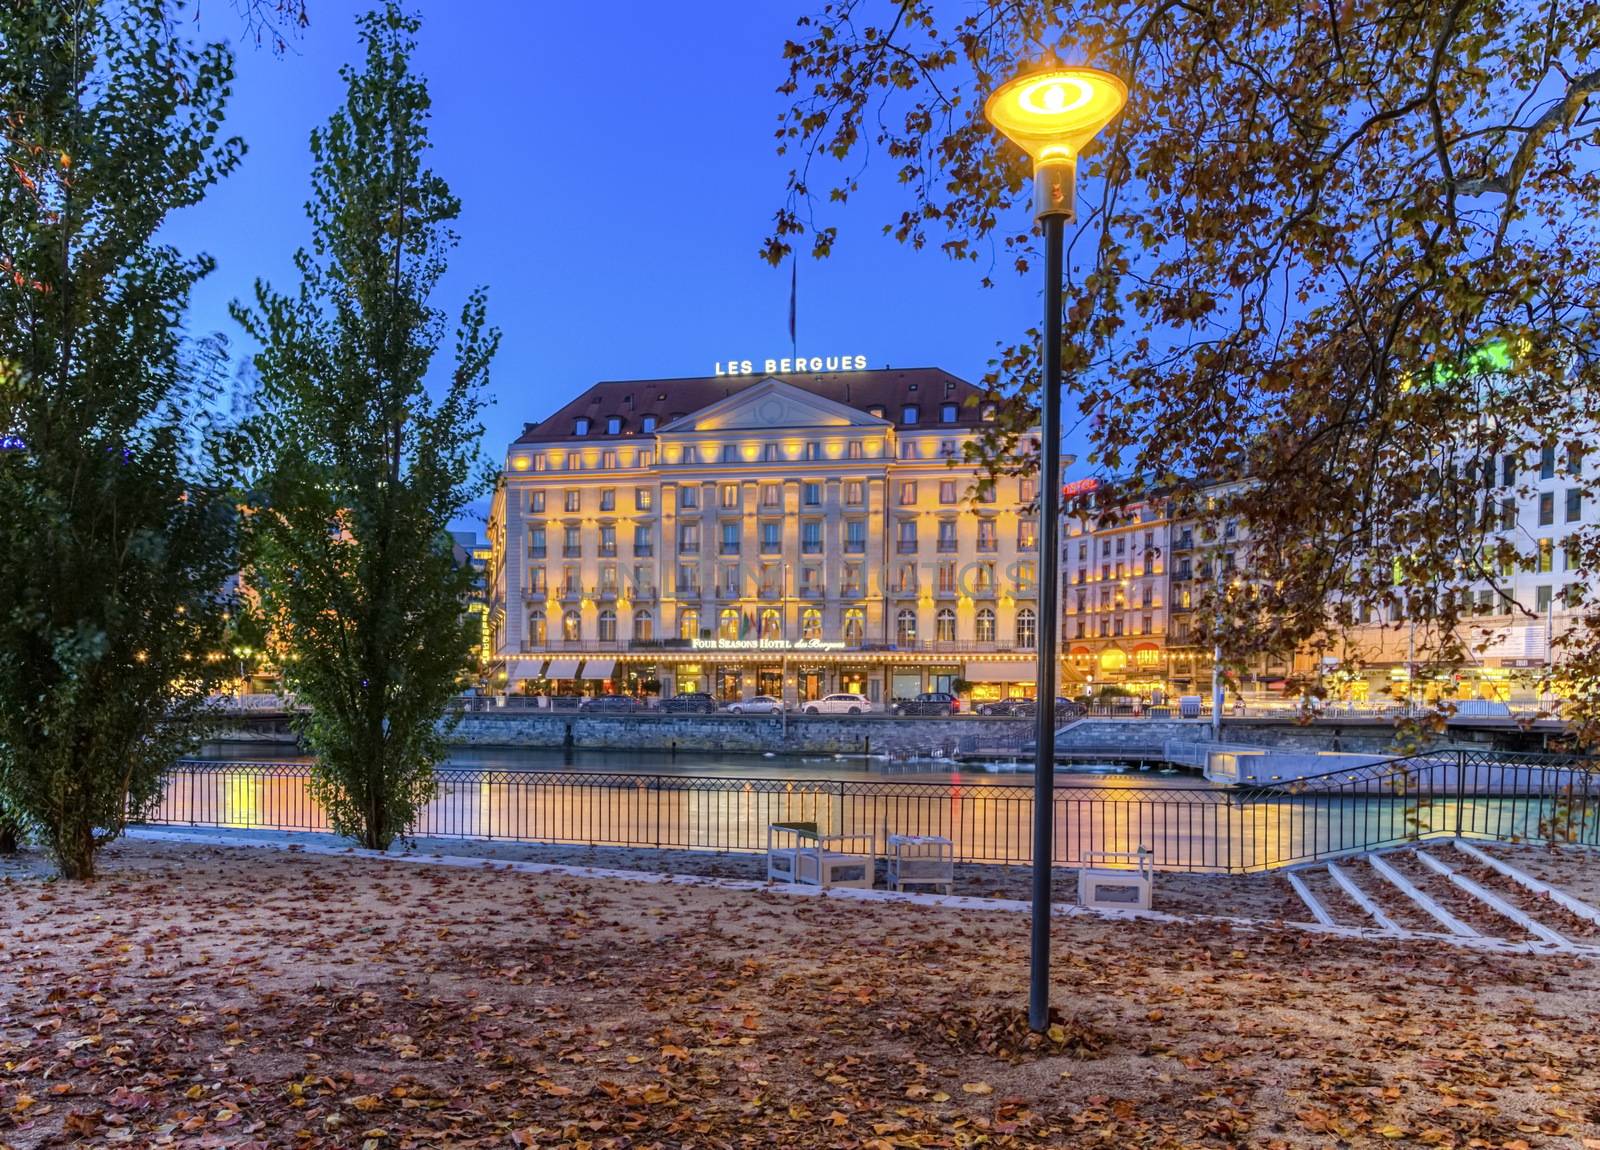 Bergues Hotel and riverside from Rousseau island, Geneva, Switzerland, HDR by Elenaphotos21